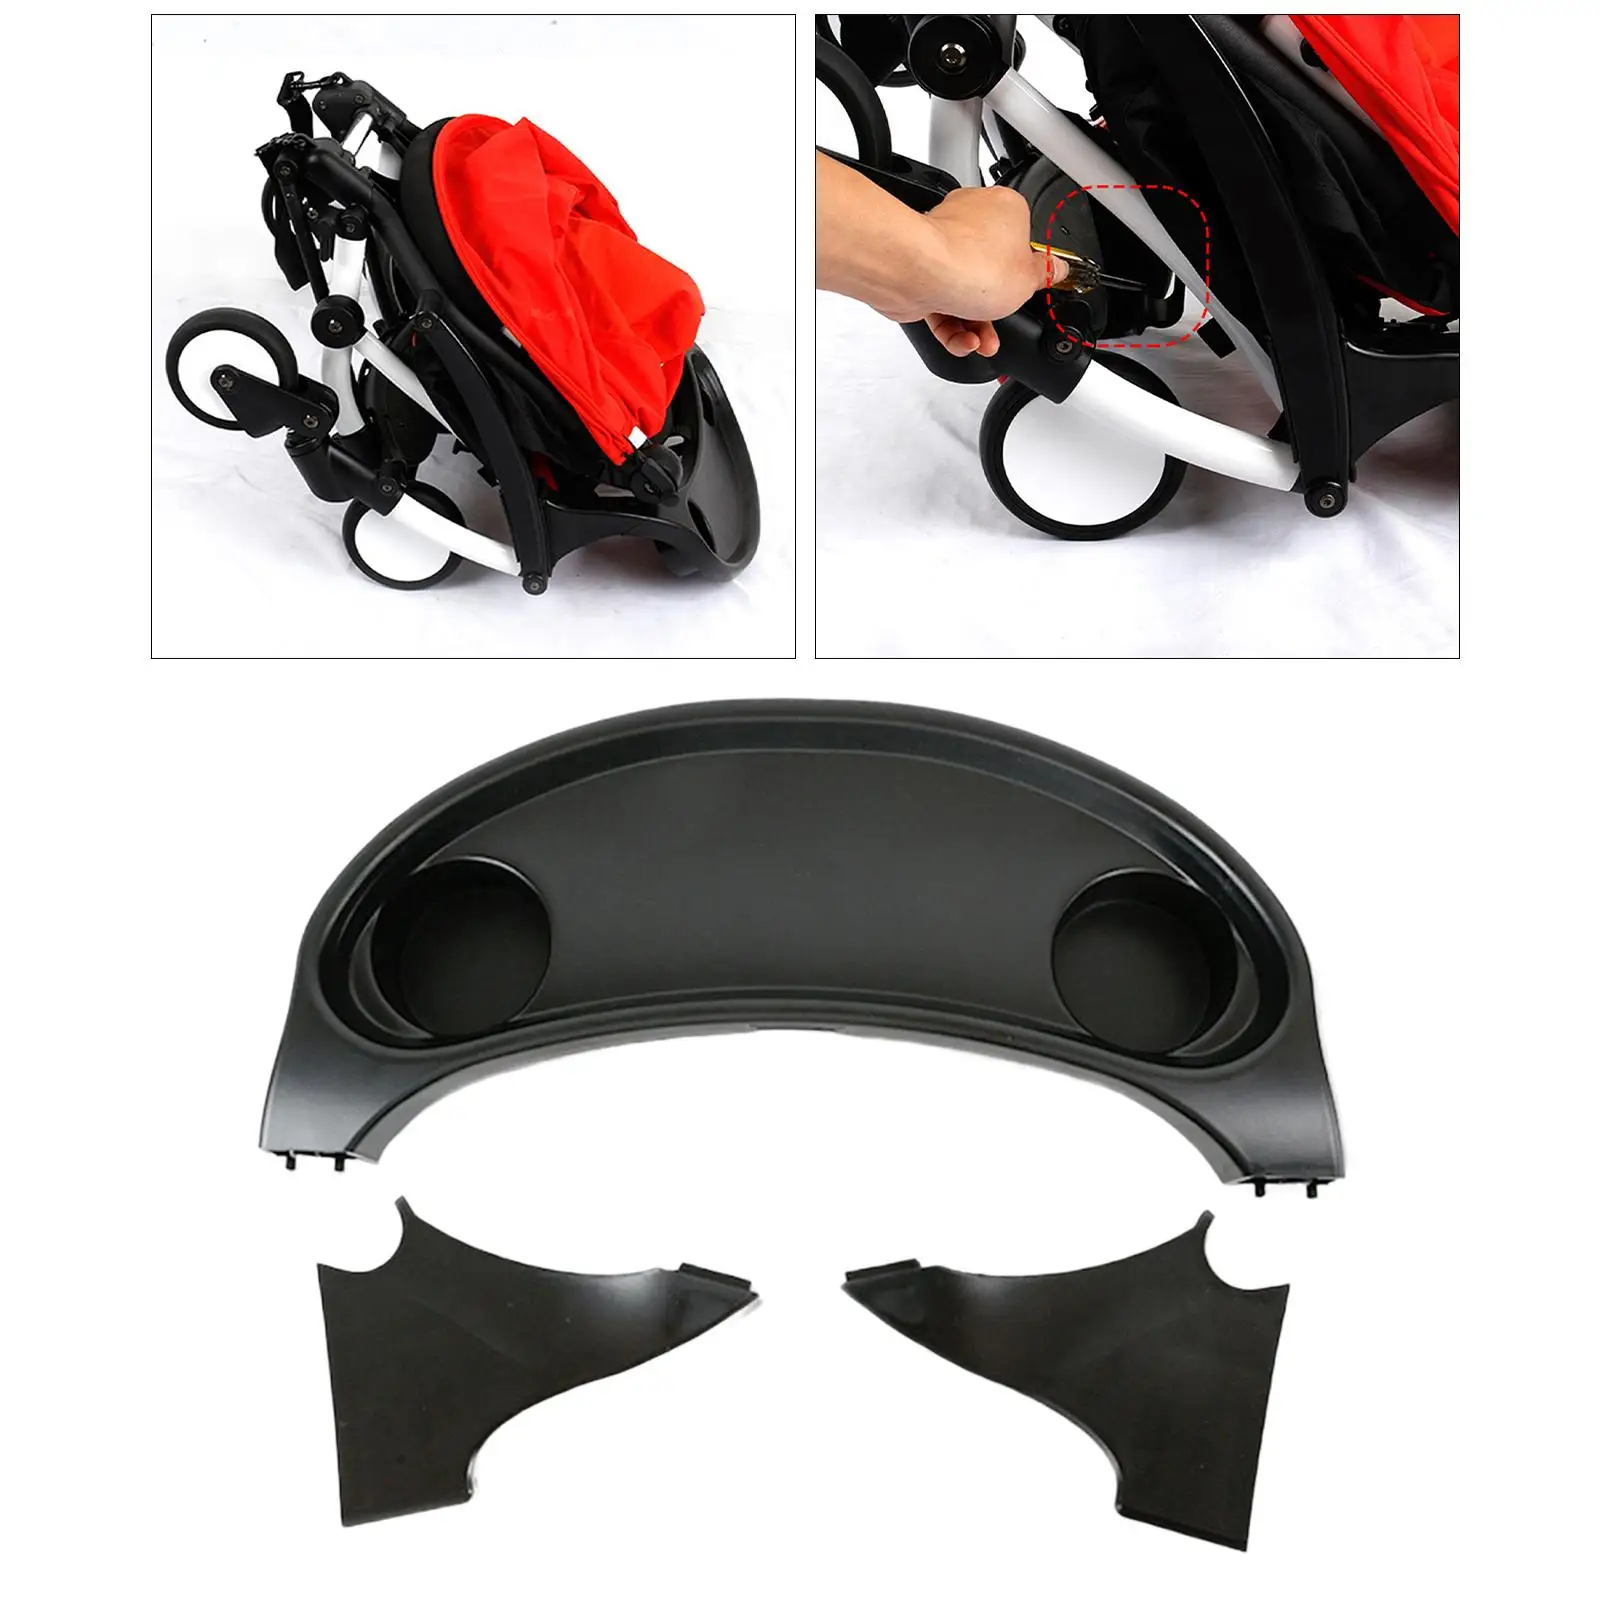 Baby Stroller Professional Made of ABS Plastic Durable for  Yoyo+